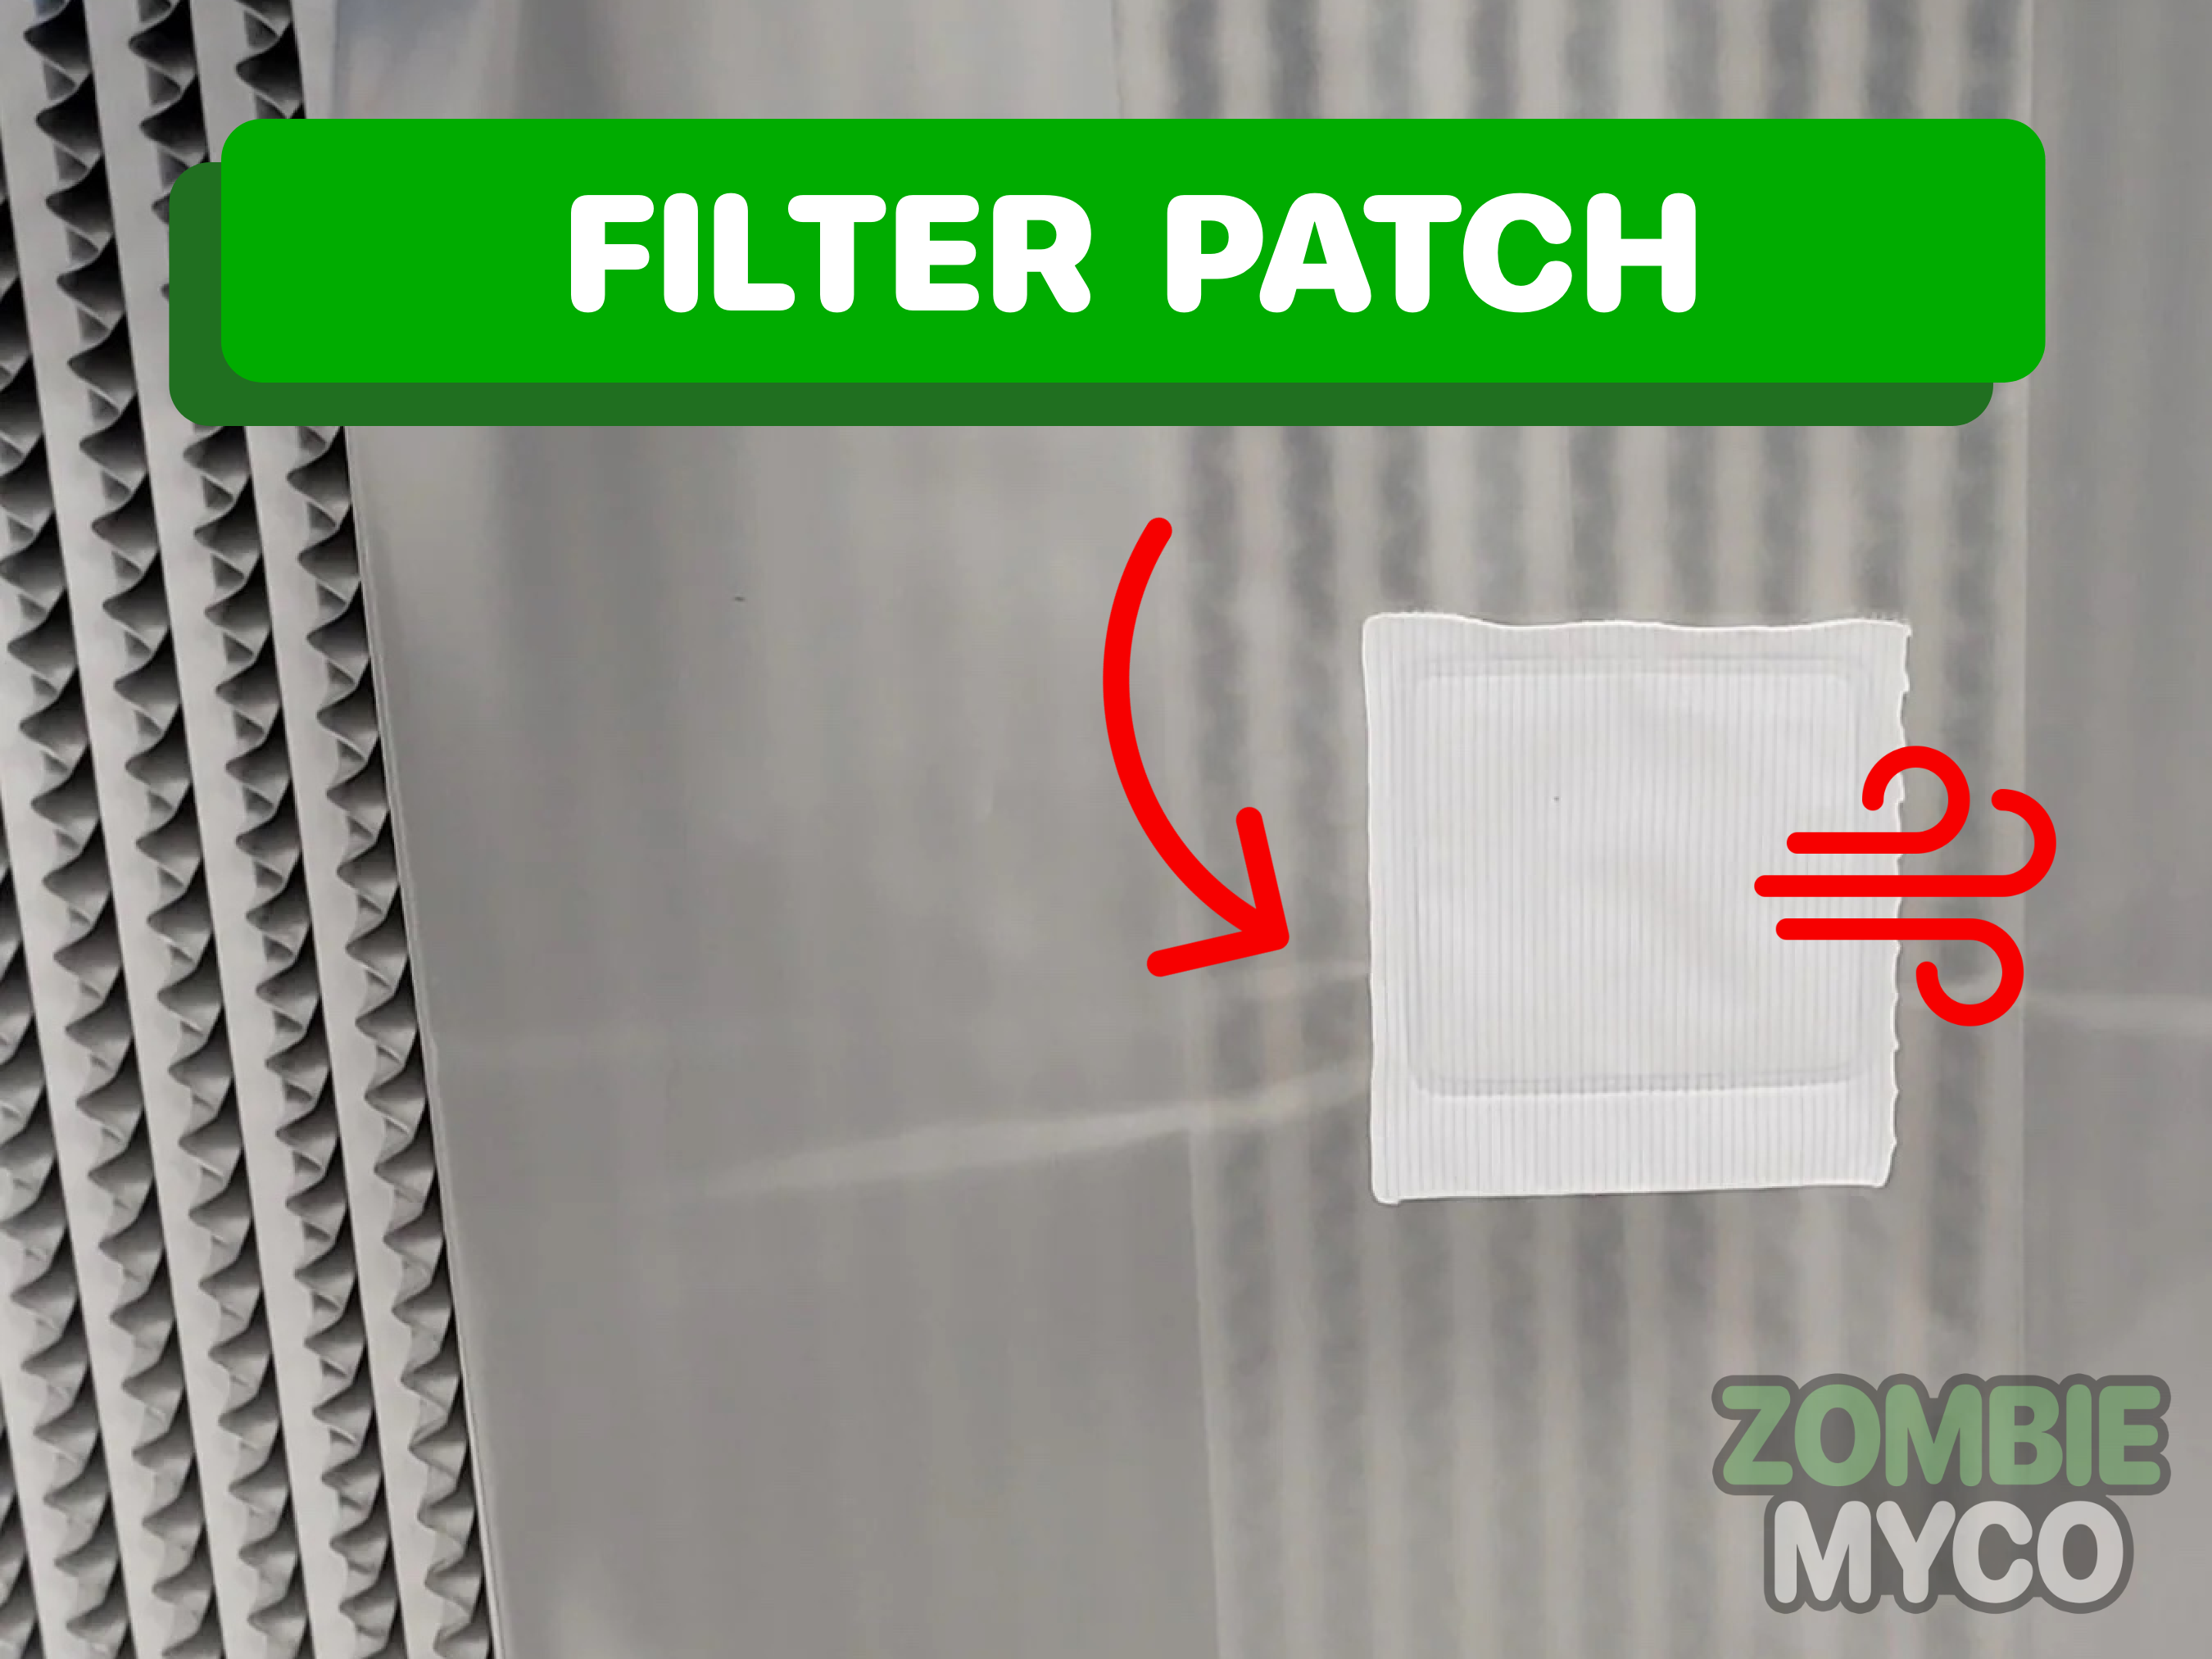 THE FILTER PATCH